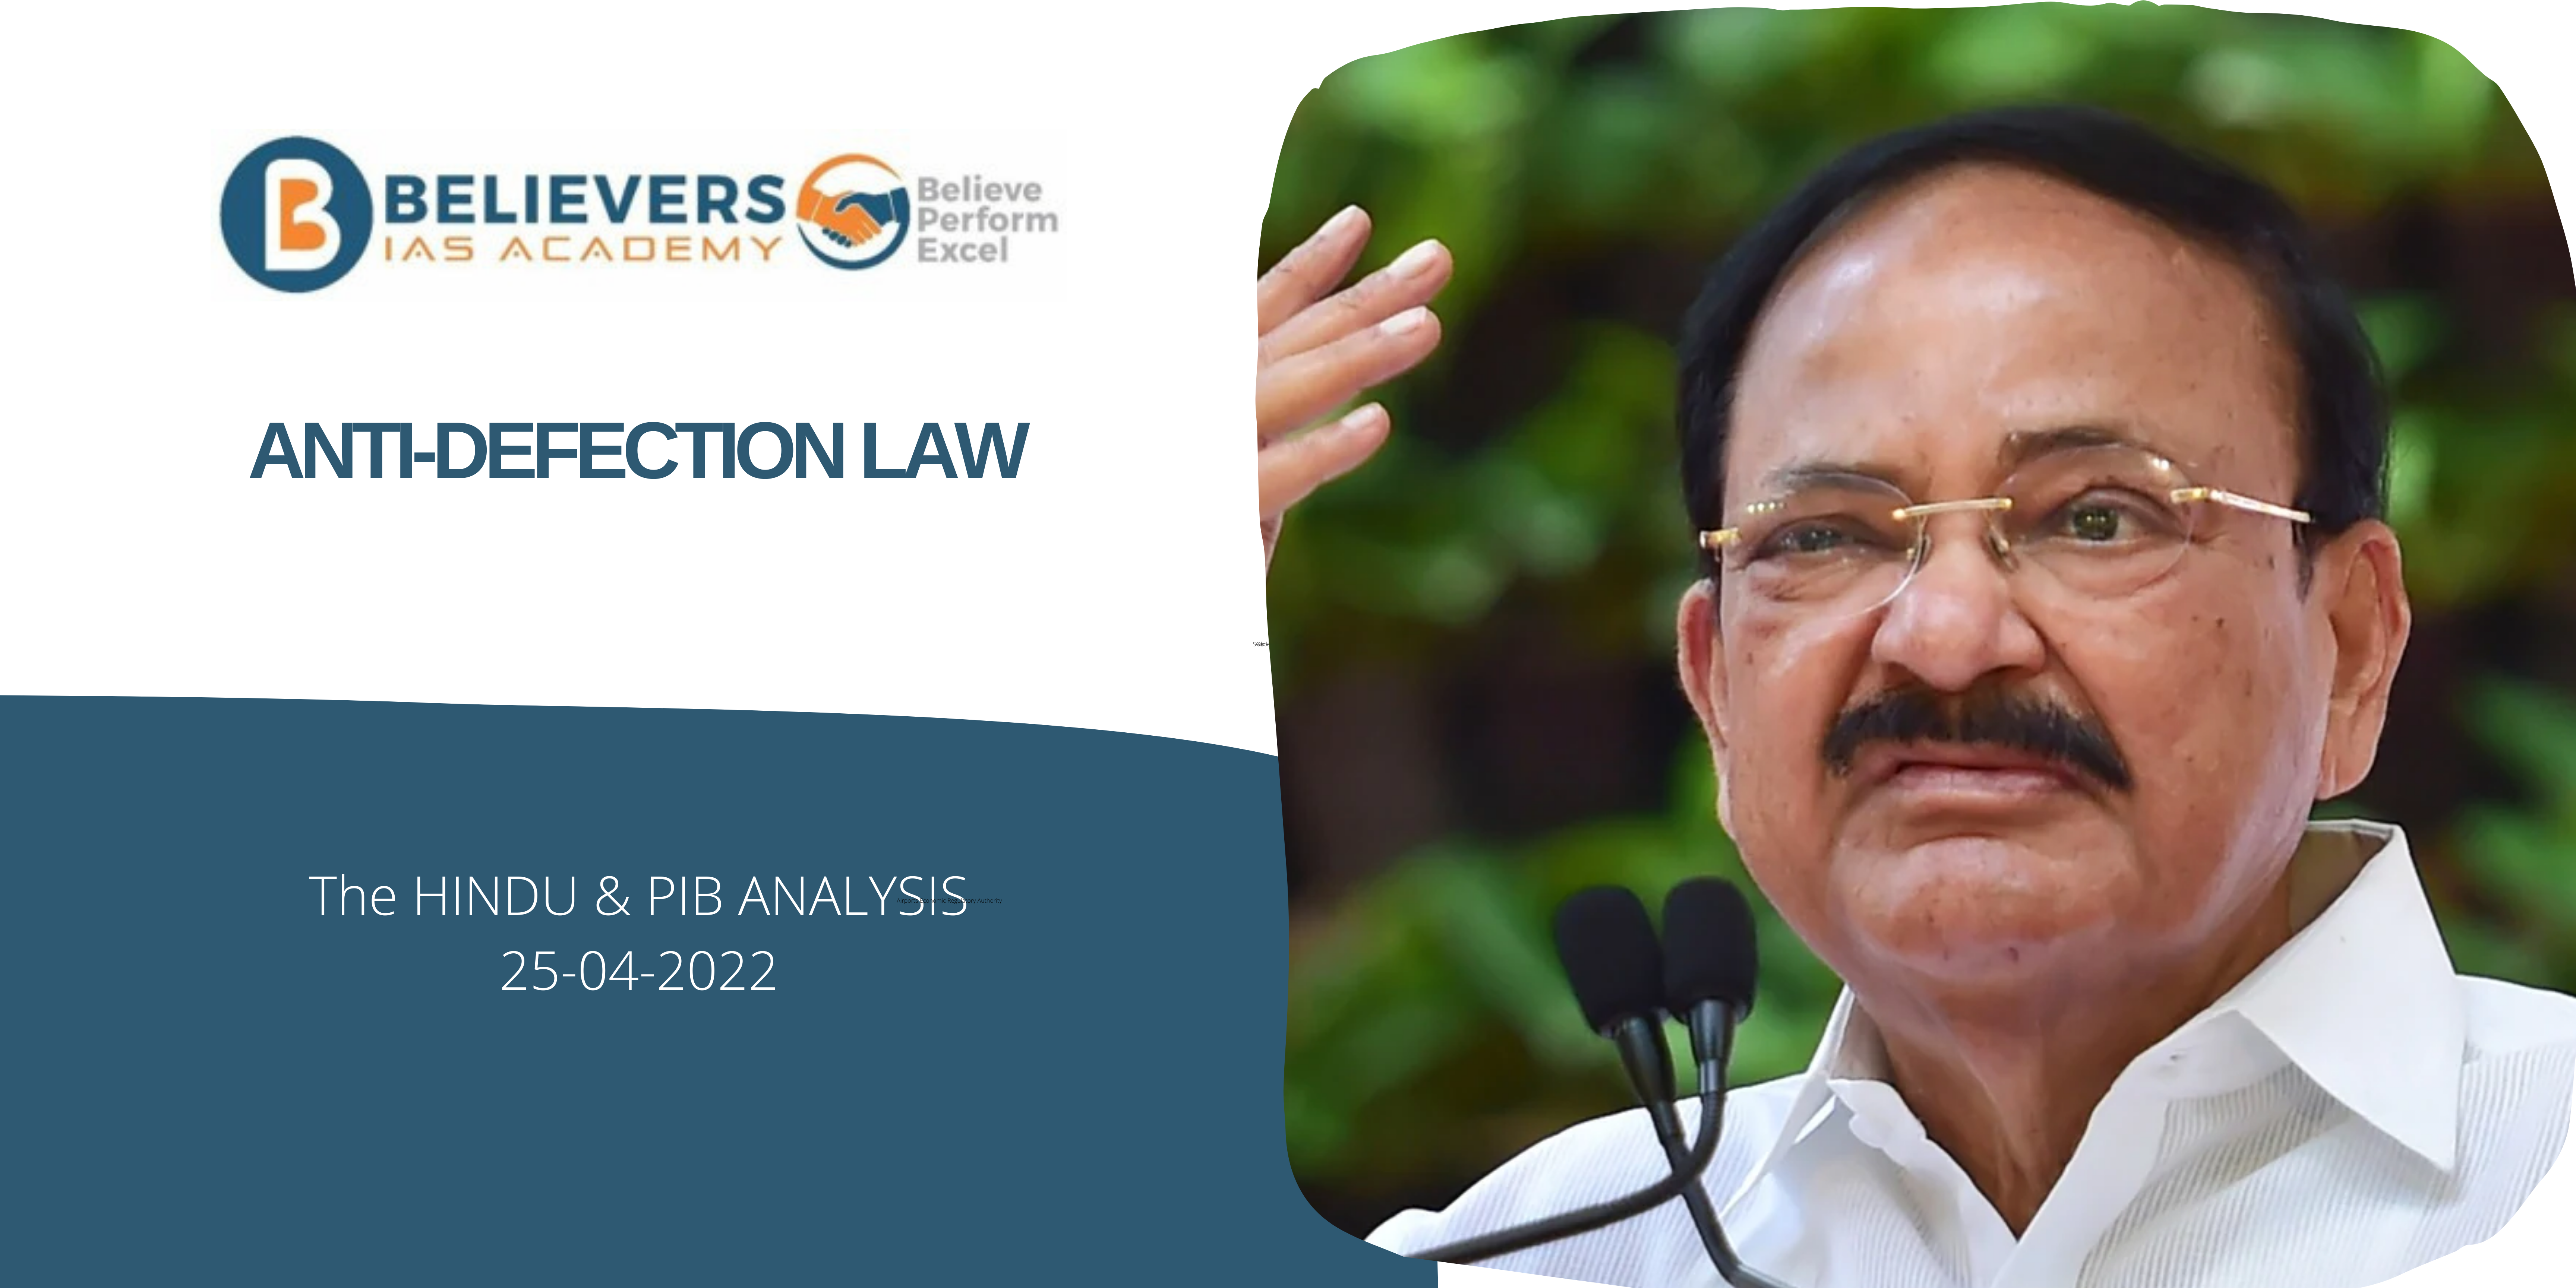 UPSC Current affairs - Anti-defection law